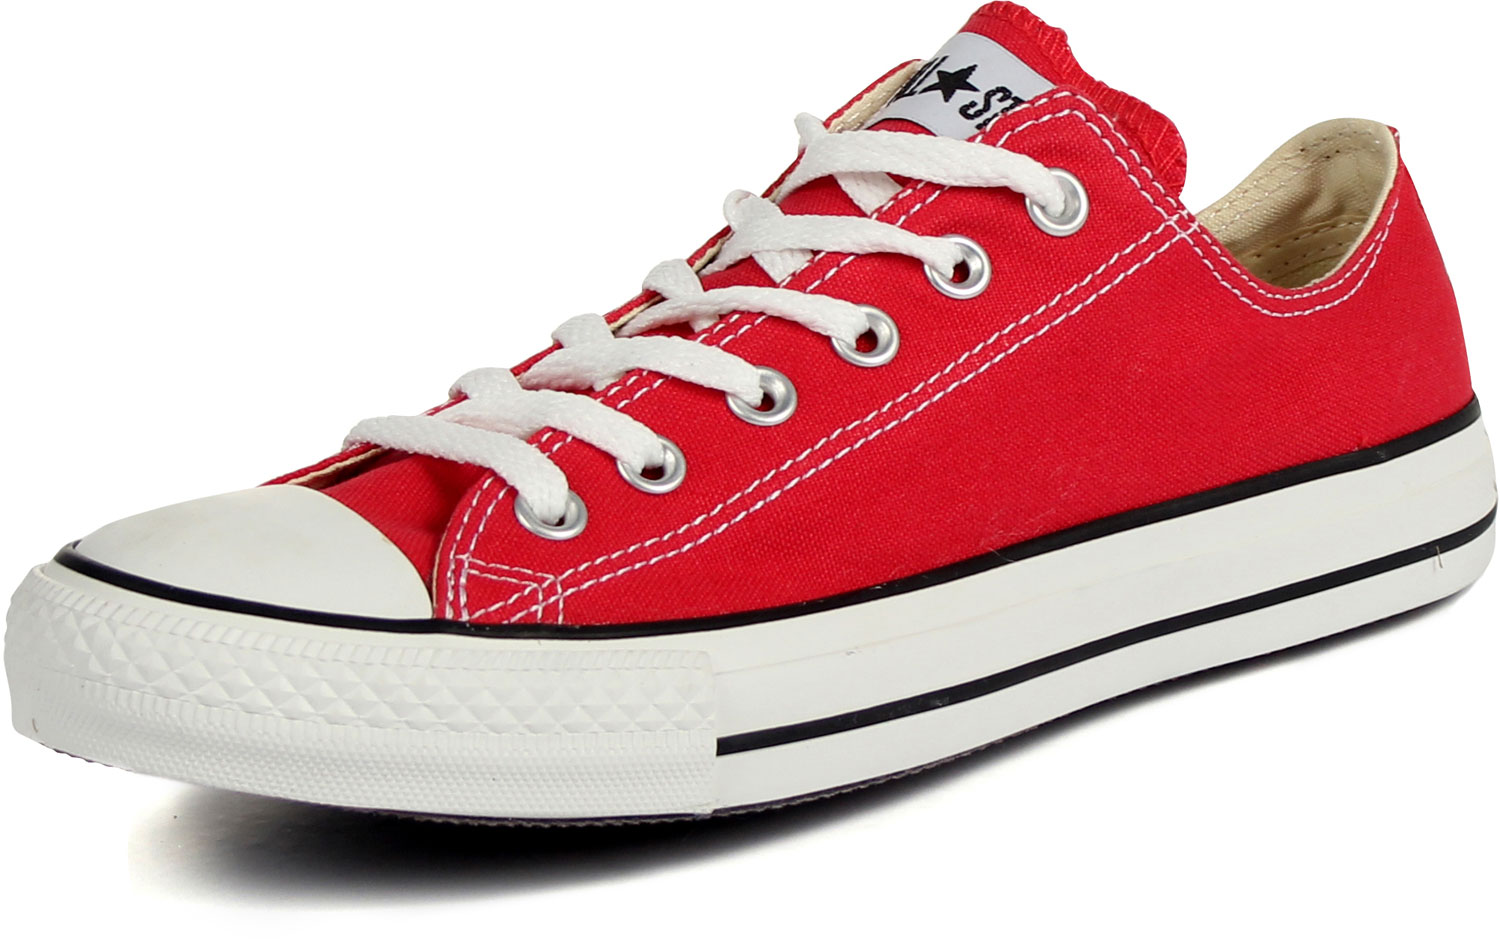 Converse Chuck Taylor All Star Shoes (M9696) Low Top in Red